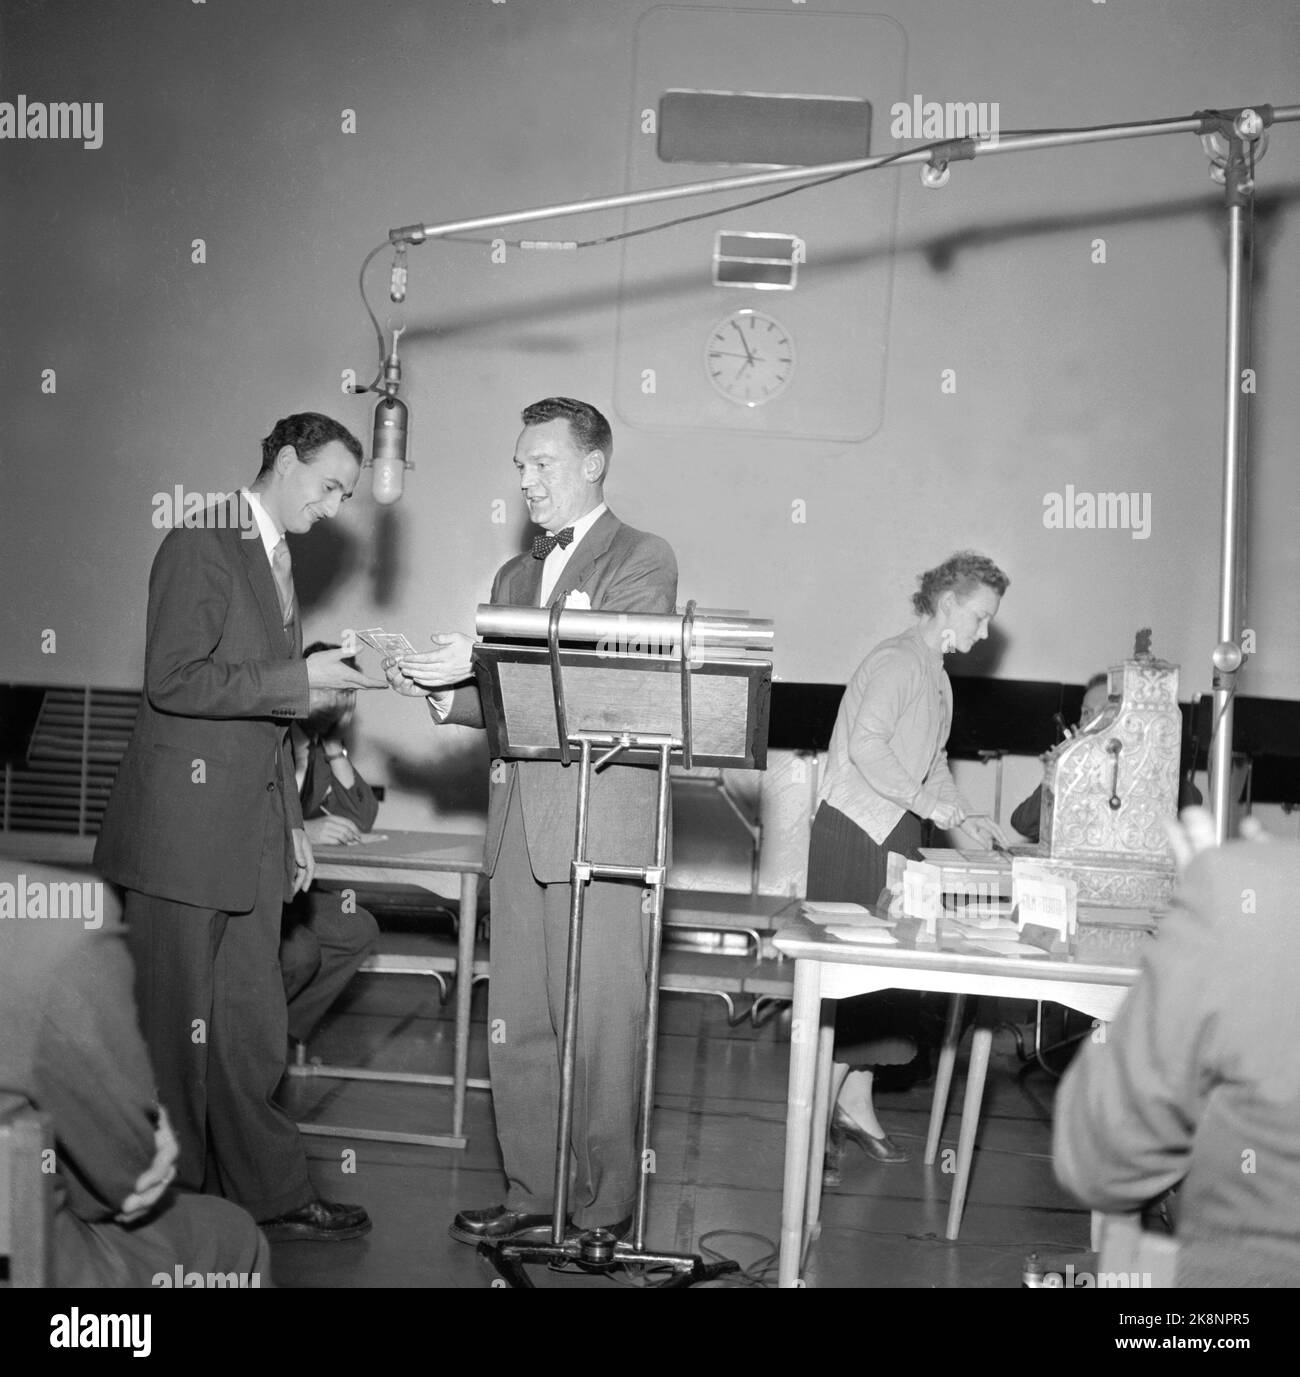 Oslo 19541209 from NRK's radio program 'The light hour' where the knowledge competition 'The question' with Rolf Kirkvaag was included. The cash register 'Jonatan' was central to the program. The questions had to be found on the questions, they were divided into five groups after free elections. Five kroner for the first straight, rising to eighty shiny kroner if you answered all the questions correctly, it was the concept behind 'the question'. Here Rolf Kirkvaag (in the middle) asks the question, while an assistant awaits the cash register Jonatan to pay any gain. Photo: NTB / NTB Stock Photo